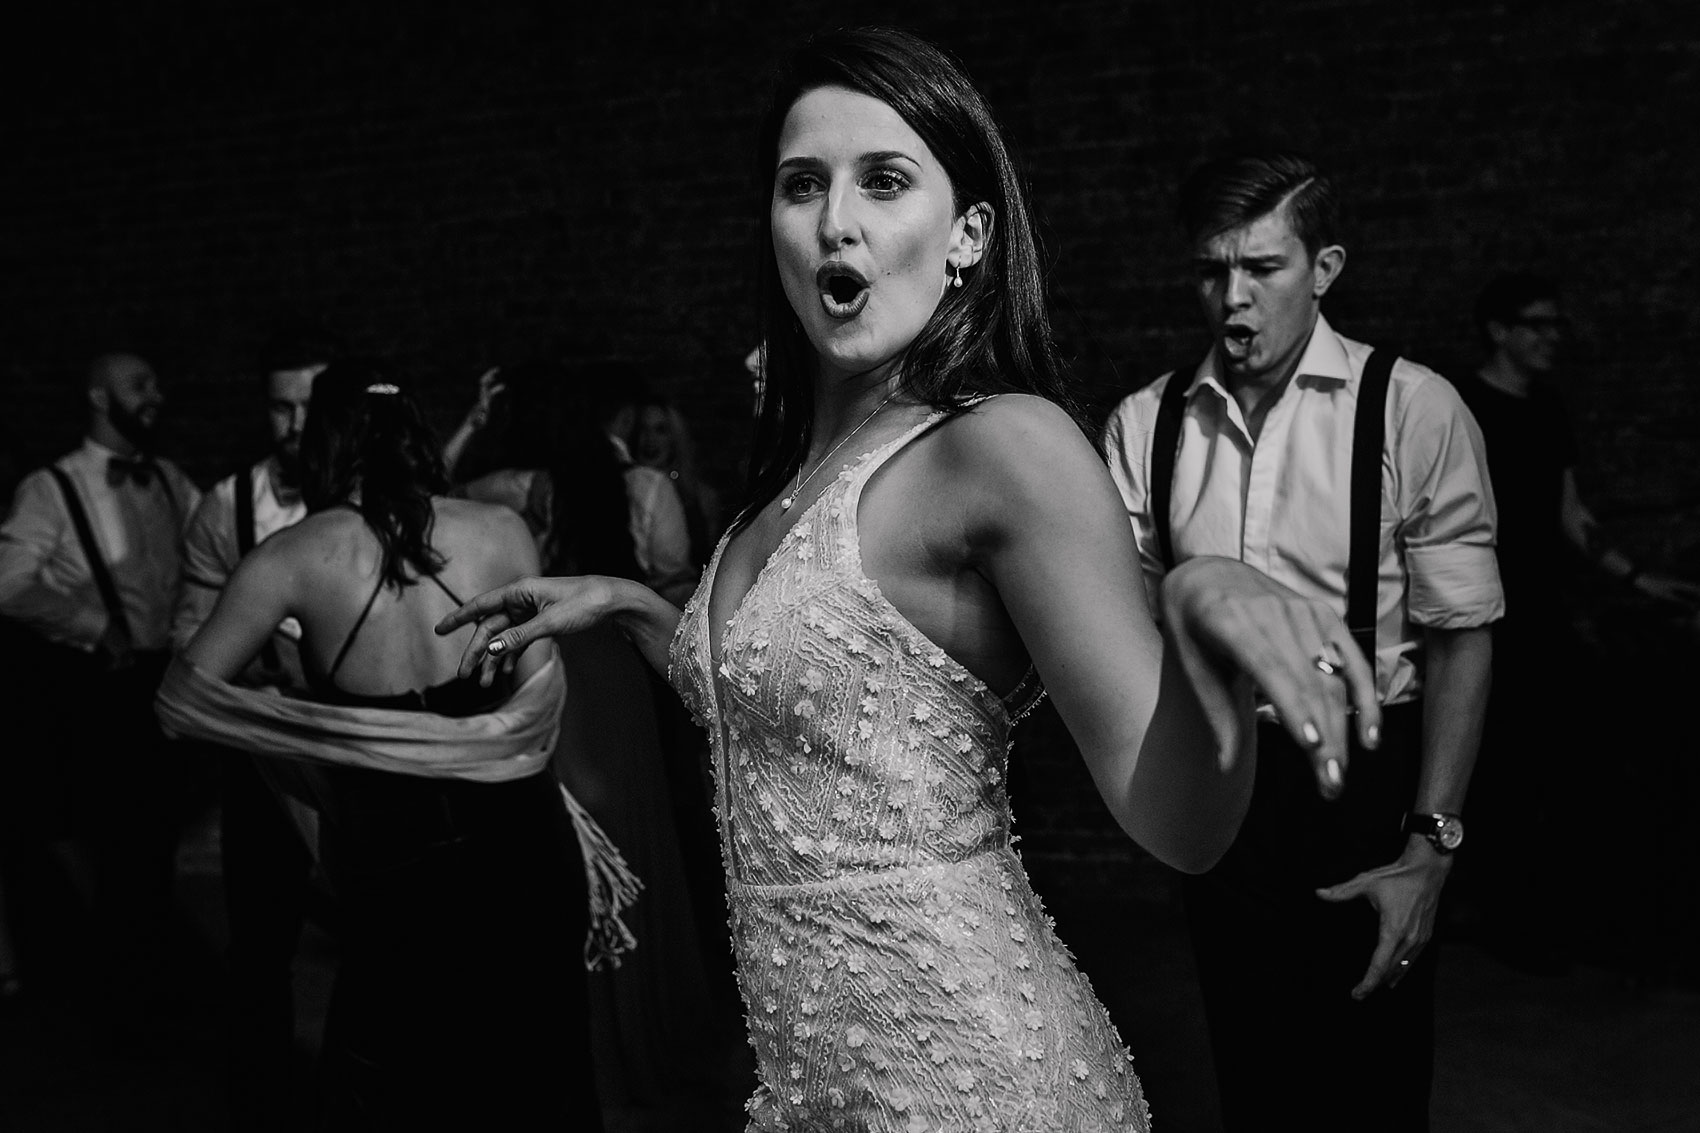 Yorkshire wedding photographers our approach to shooting the dance-floor